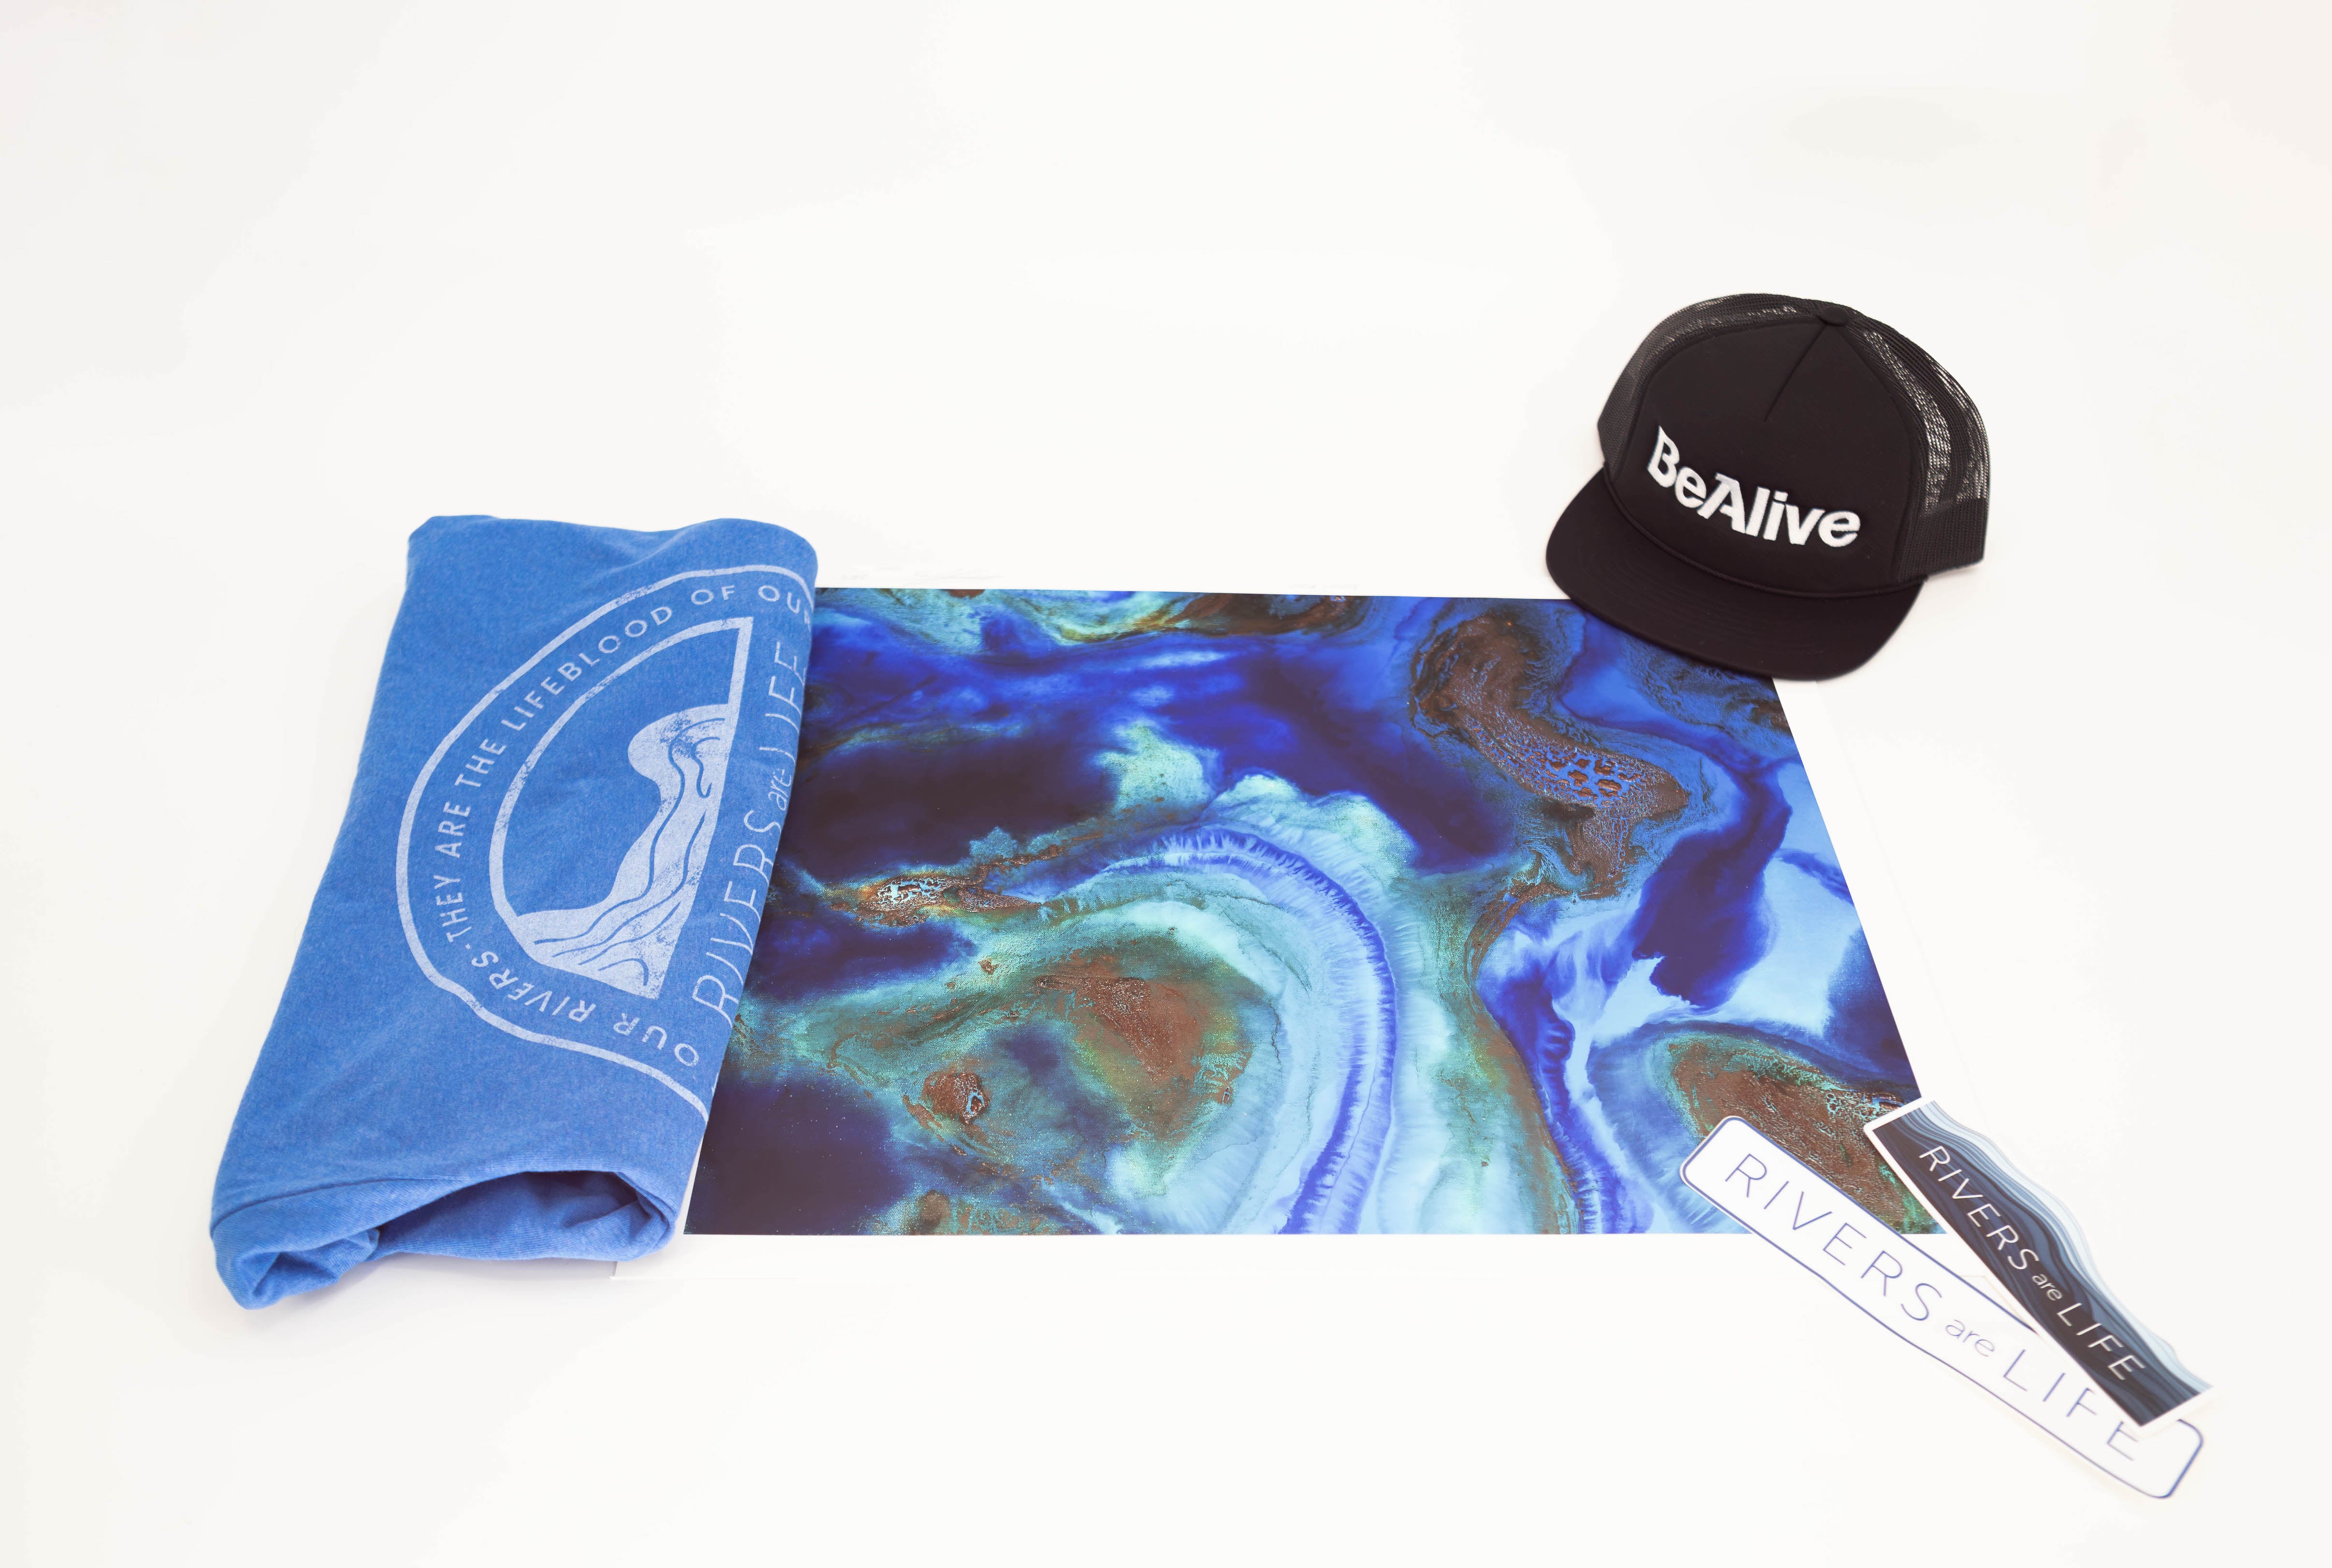 BLUE FRIDAY SPECIAL | Toxic Art Dynamic River | 20X16 in Print + RaL Shirt + BeAlive Hat